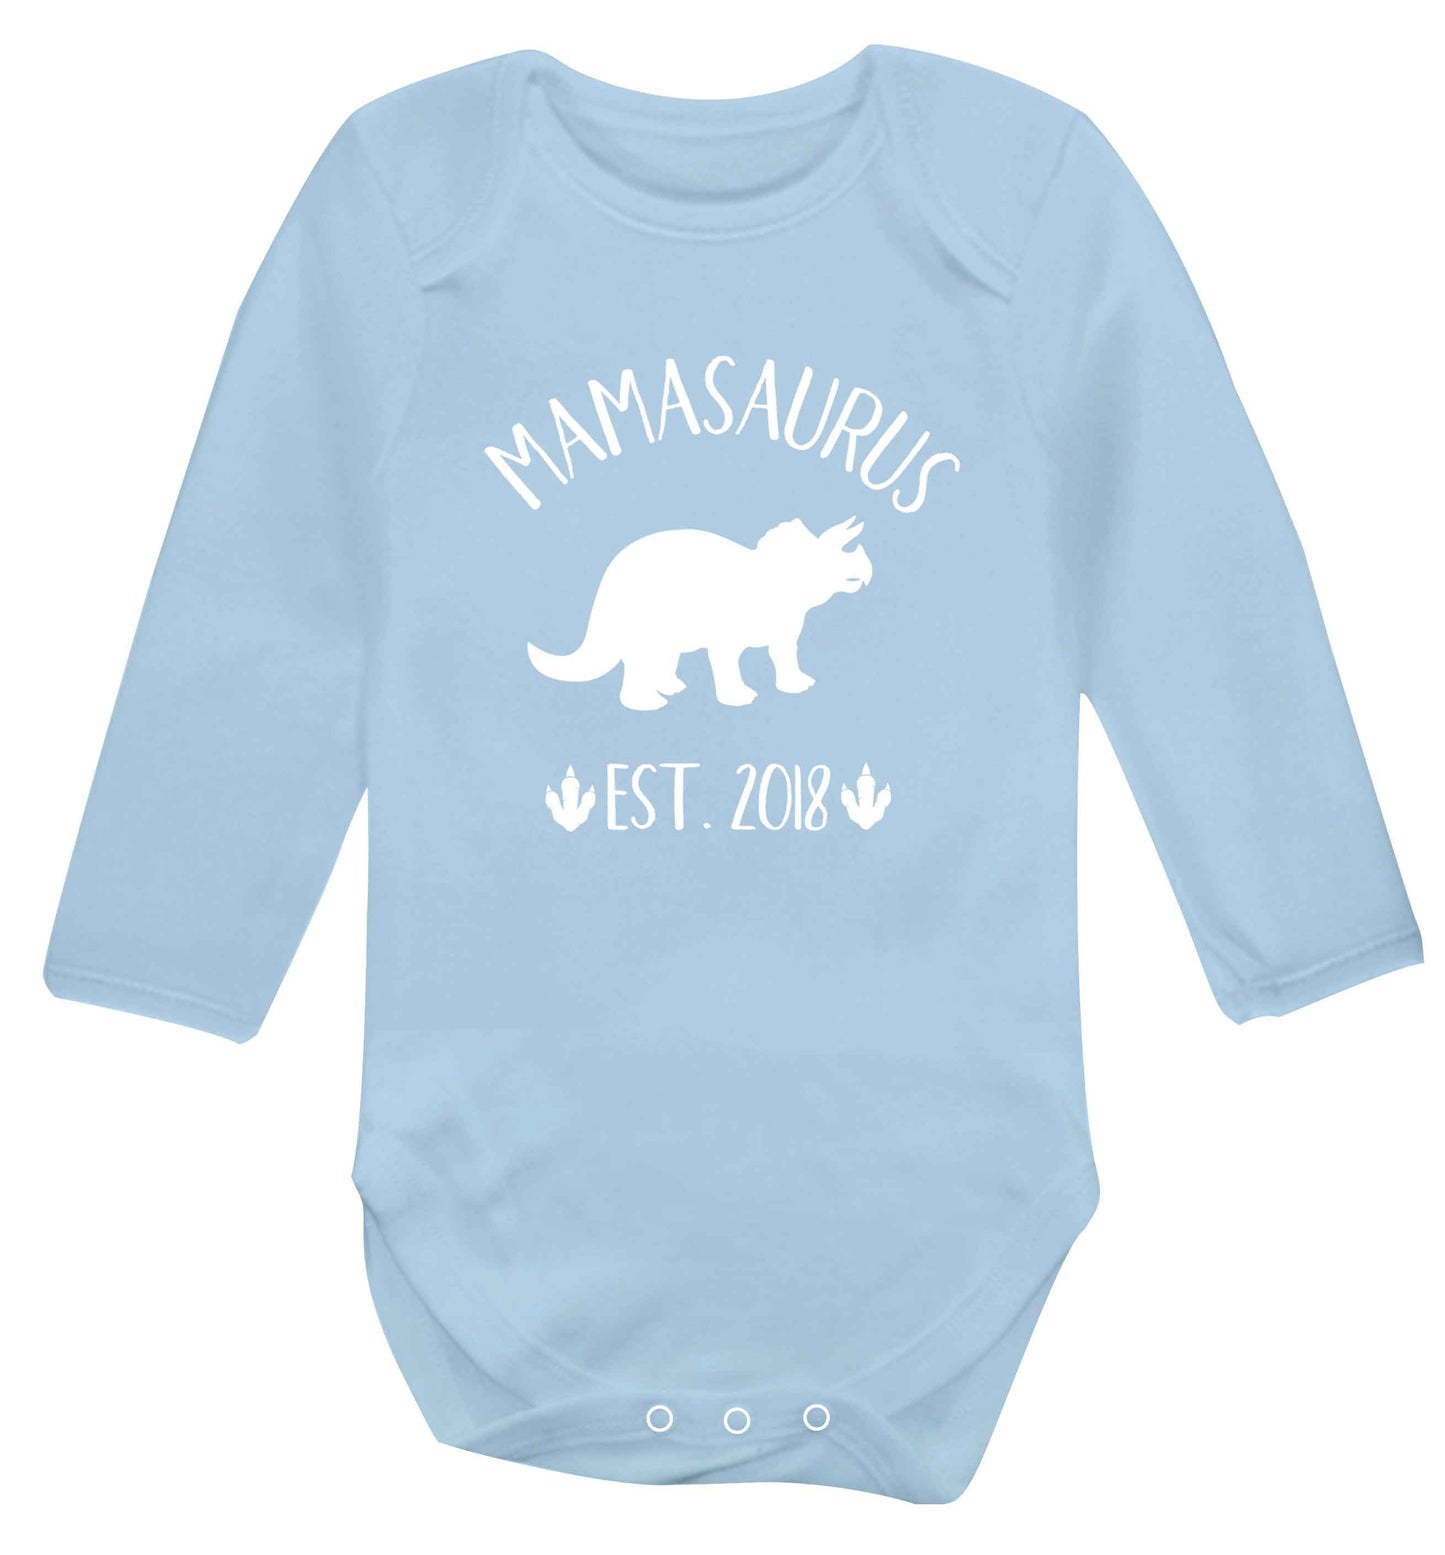 Personalised mamasaurus date baby vest long sleeved pale blue 6-12 months